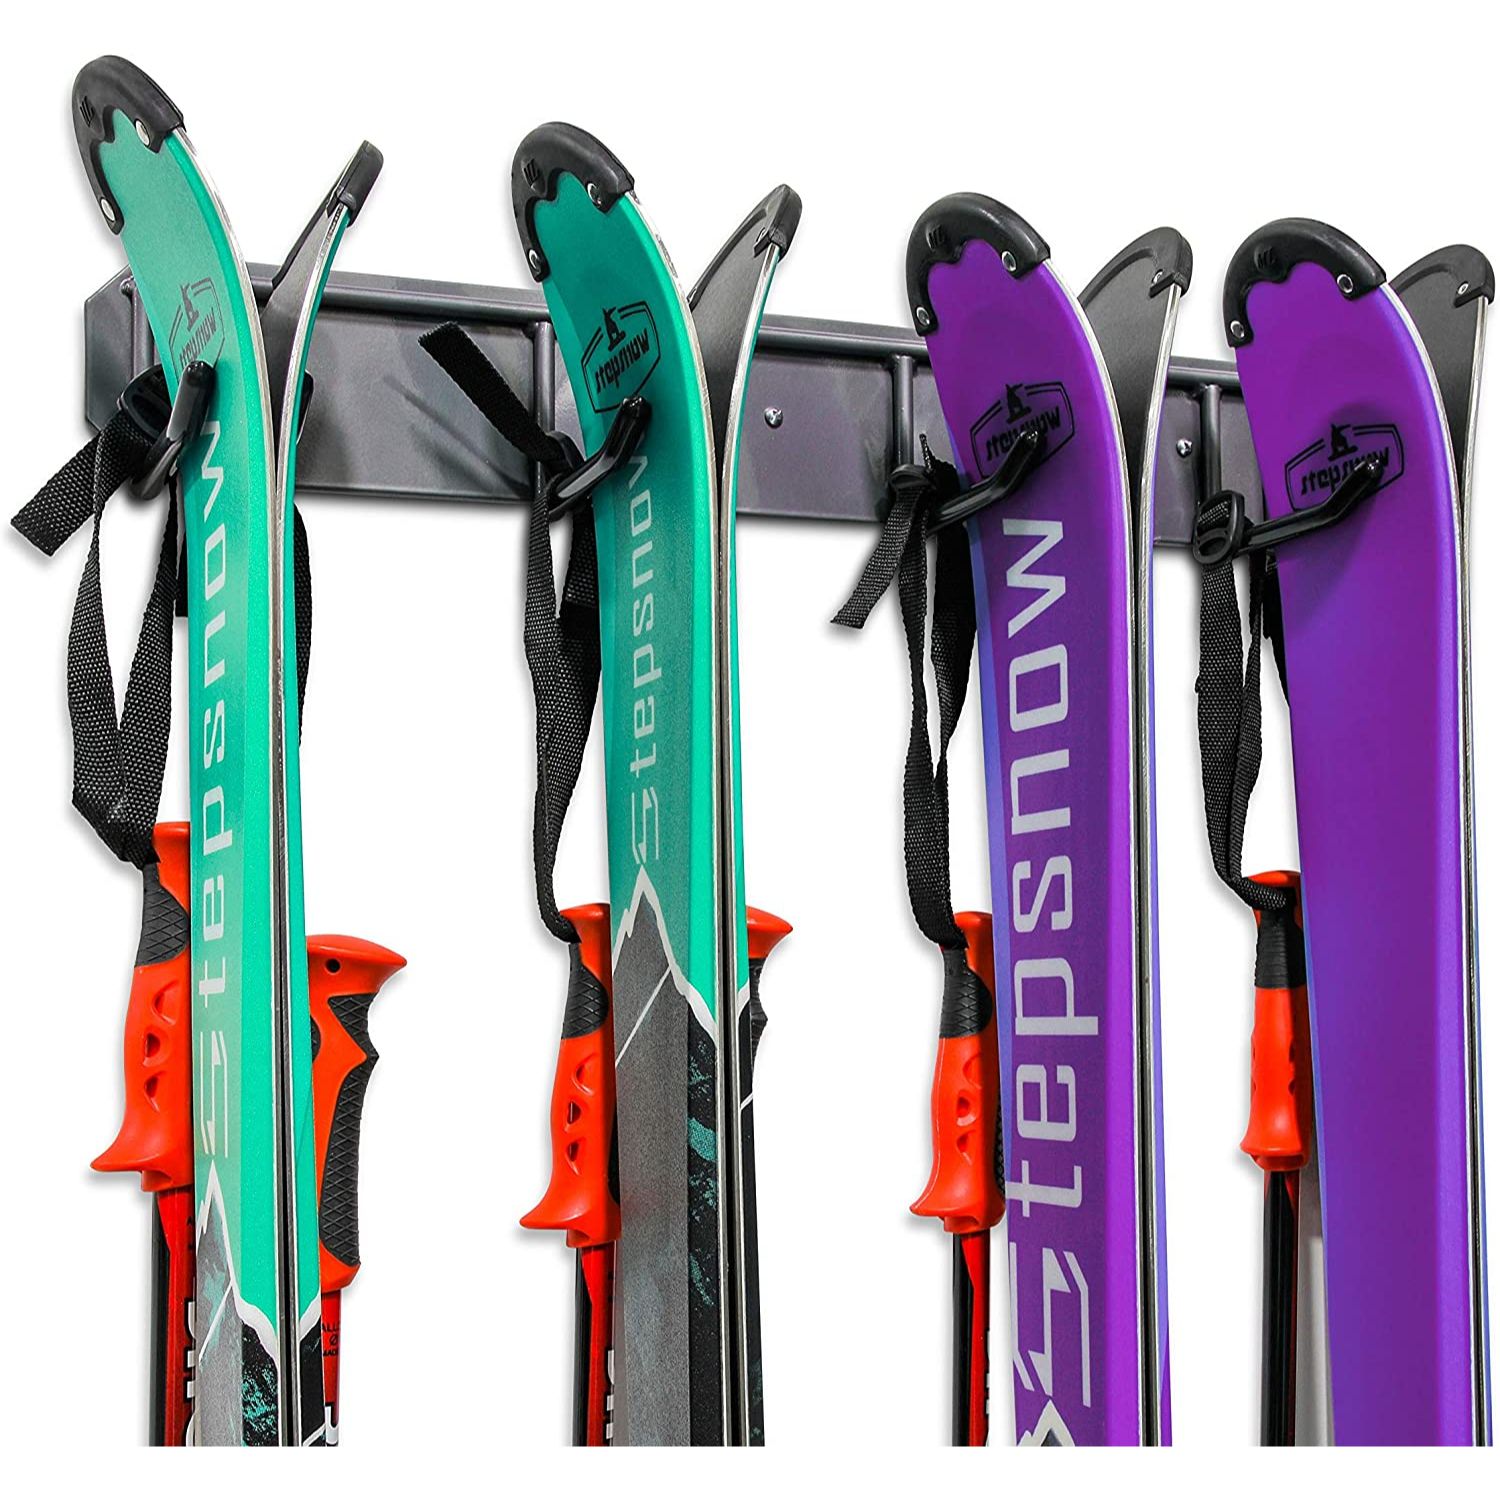 Magnetic Ski Mounts for 2 Pairs of Skis and 2 Poles 